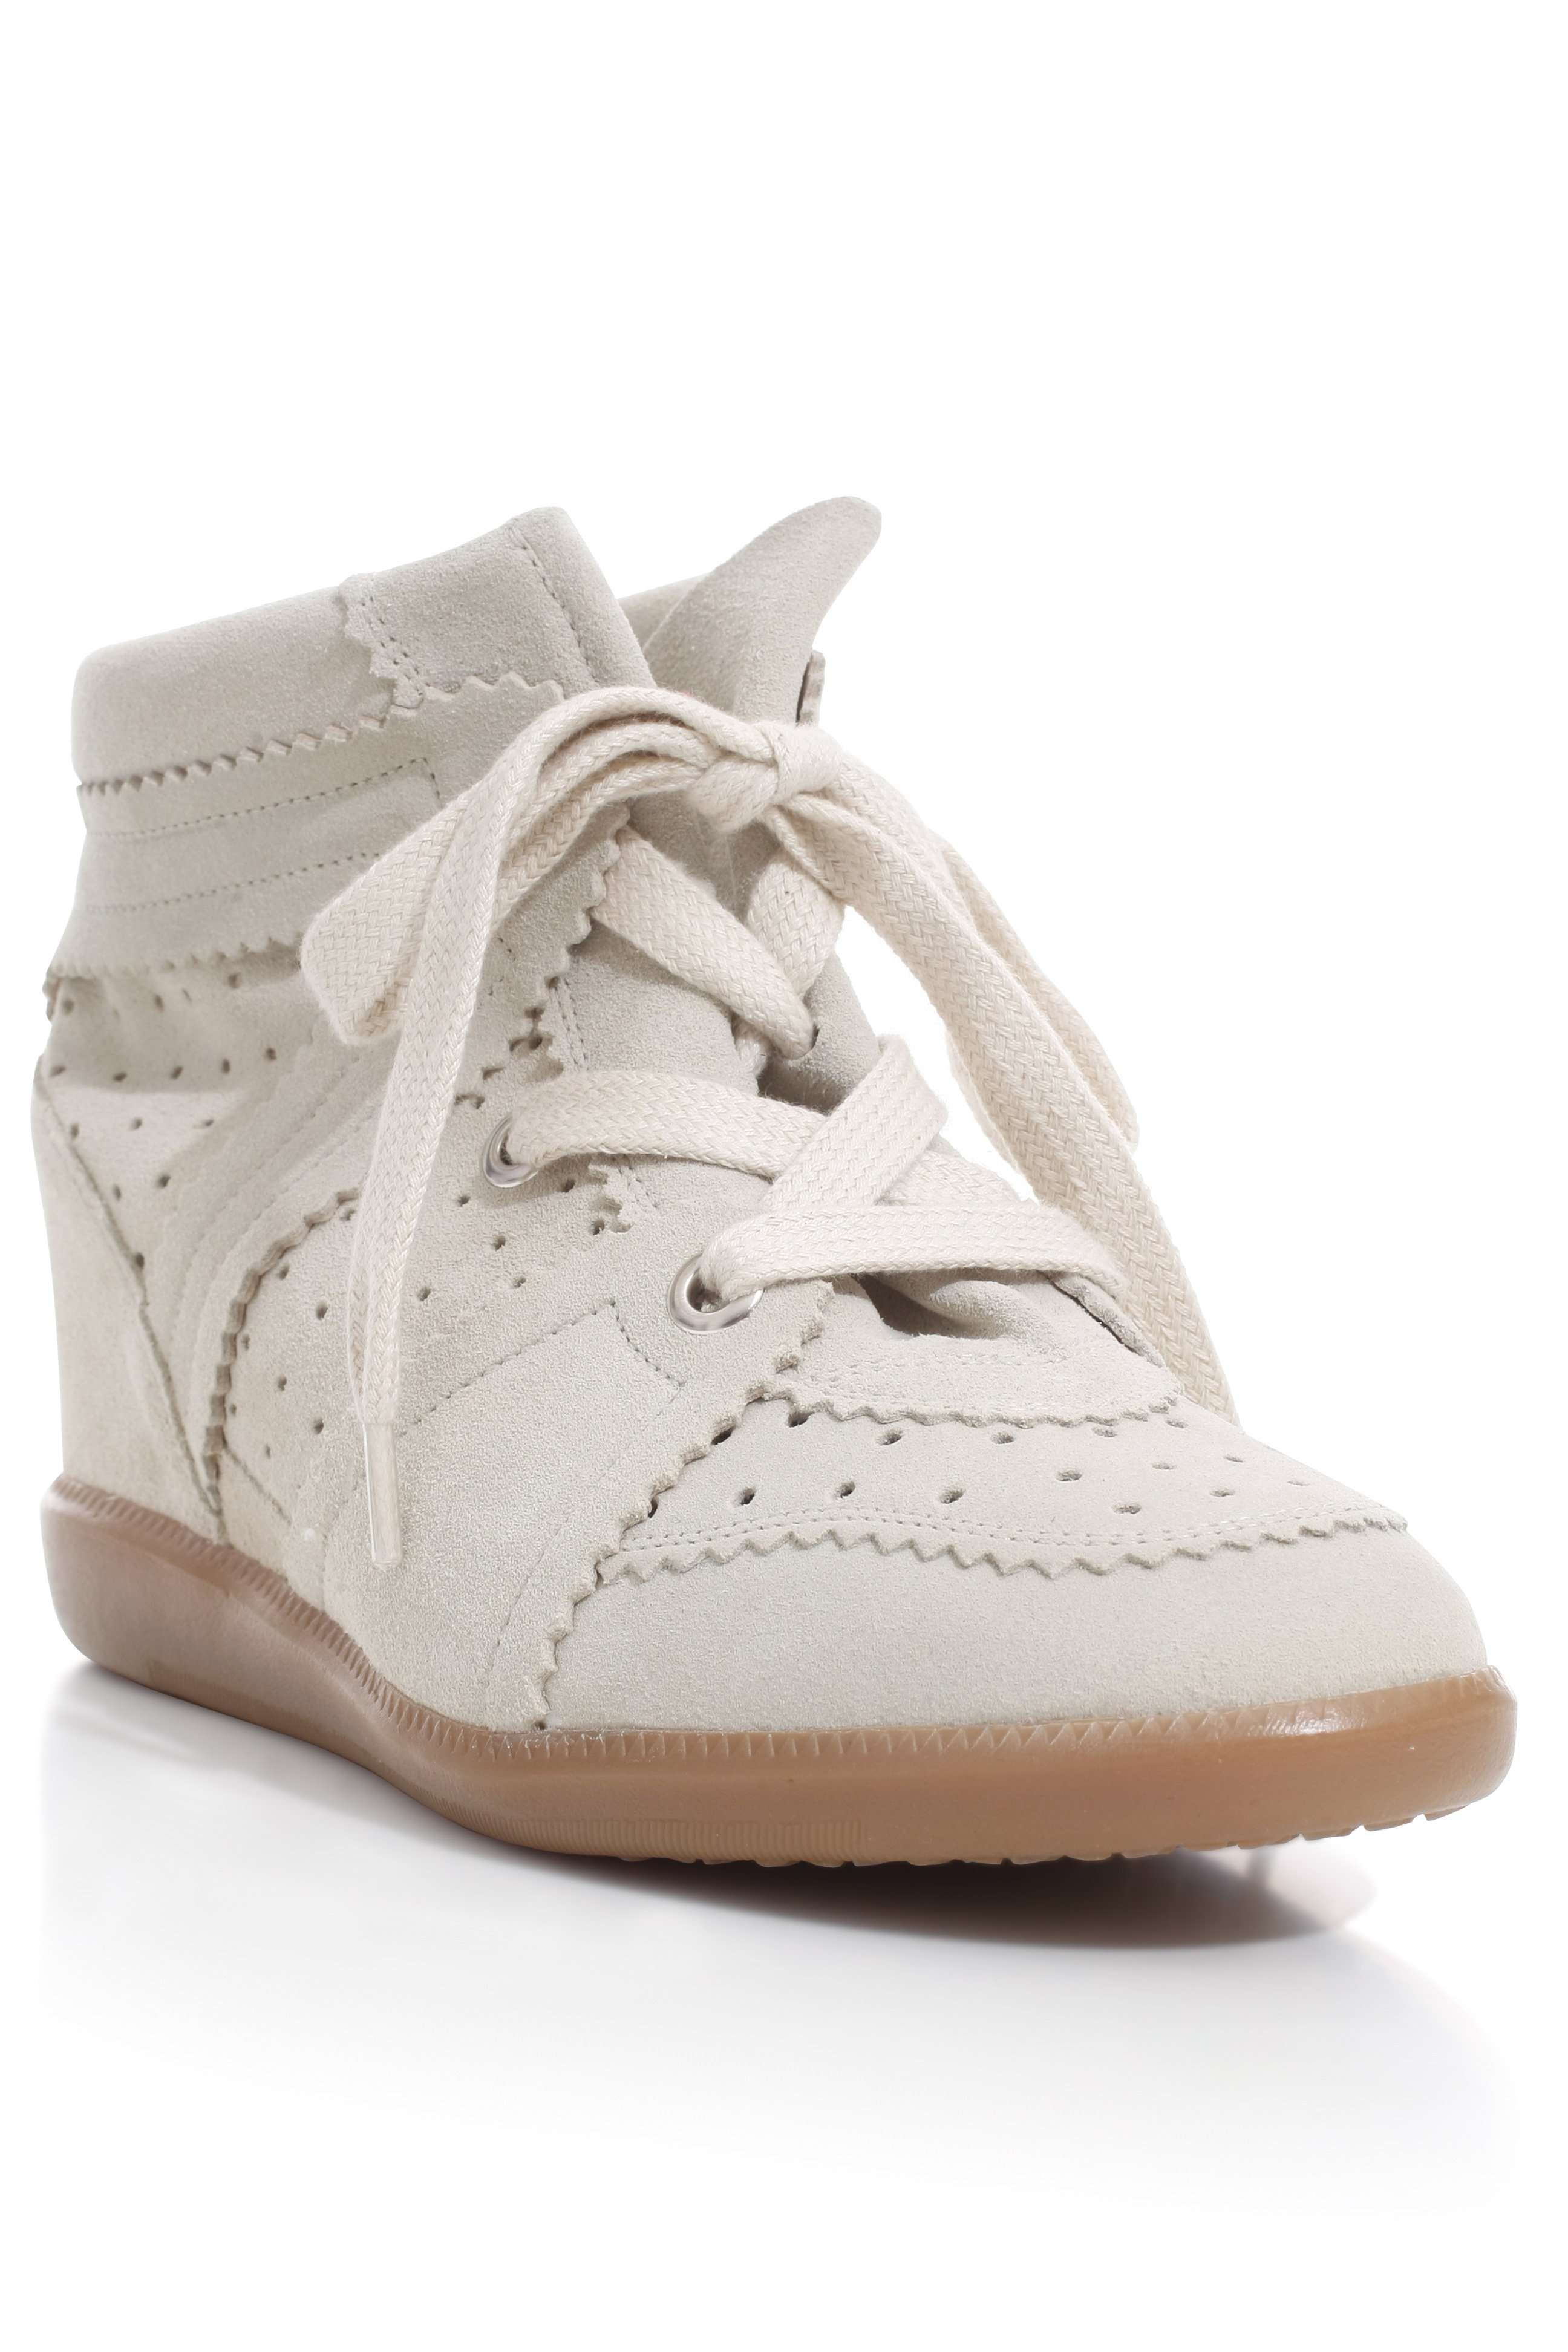 Lyst - Isabel Marant Bobby Suede Sneaker in White